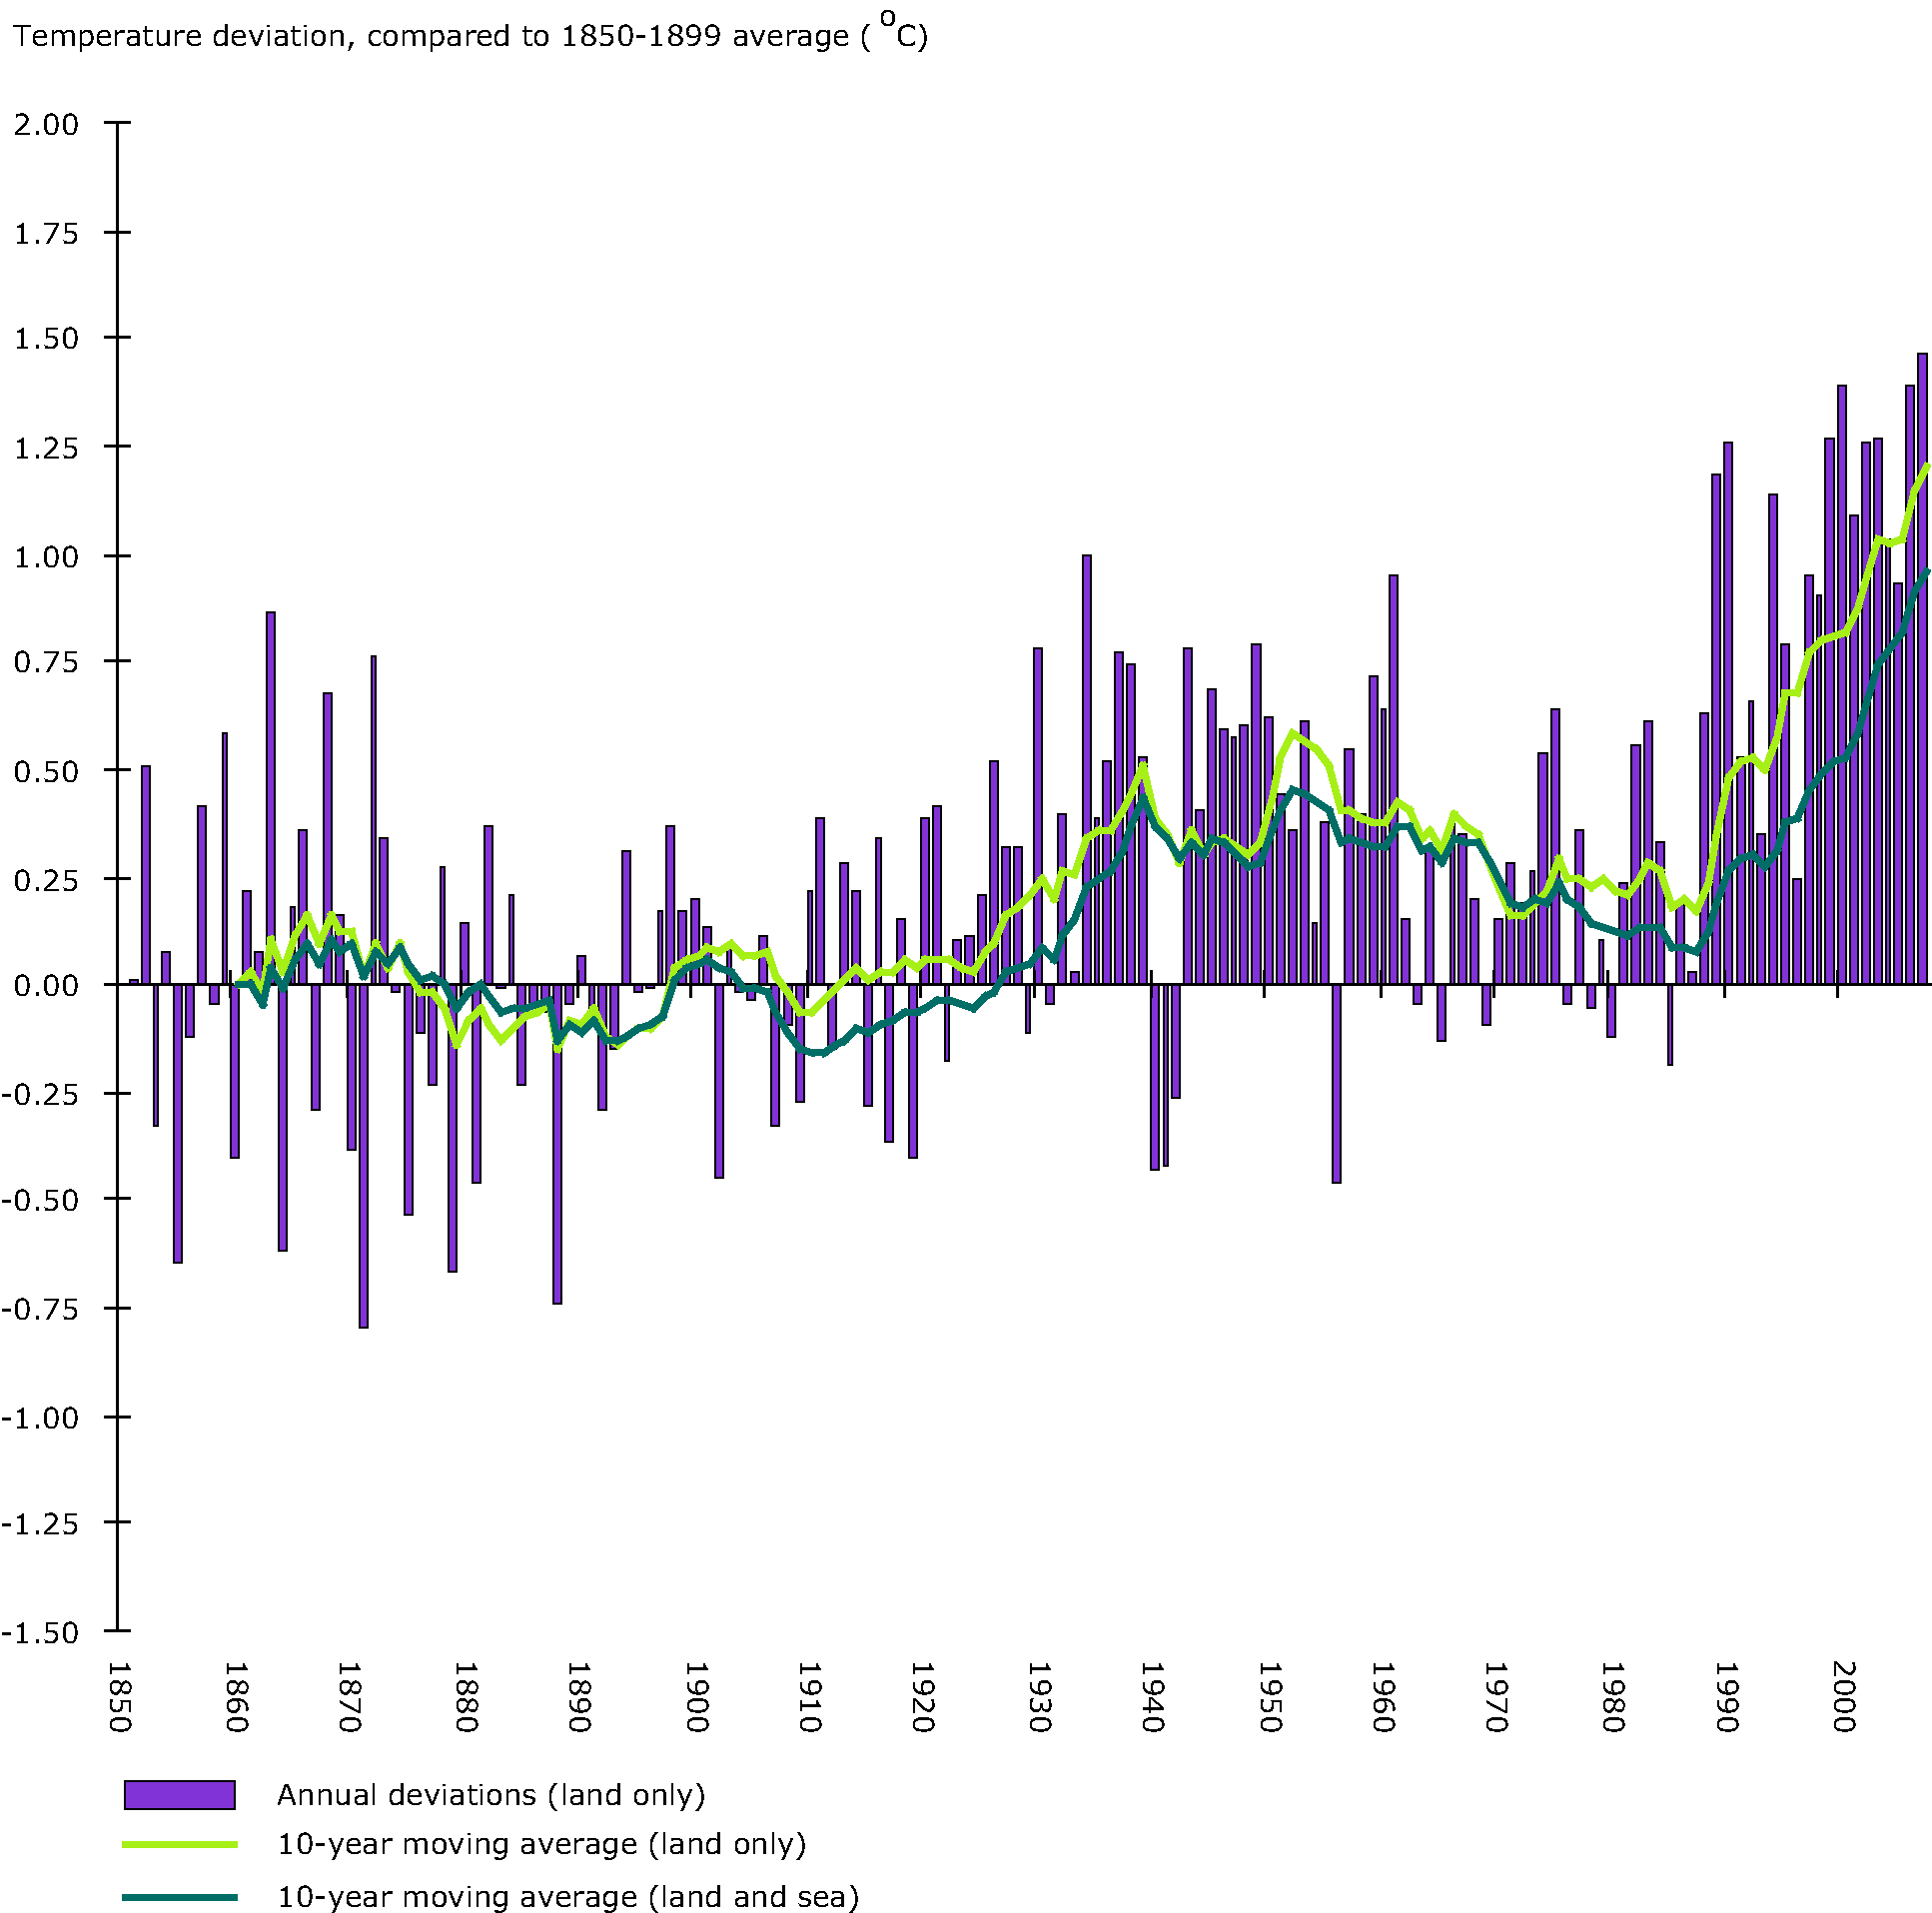 European annual average temperature deviations, 1850-2007, relative to the 1850-1899 average (in oC).The lines refer to 10-year moving average, the bars to the annual 'land only' European average.